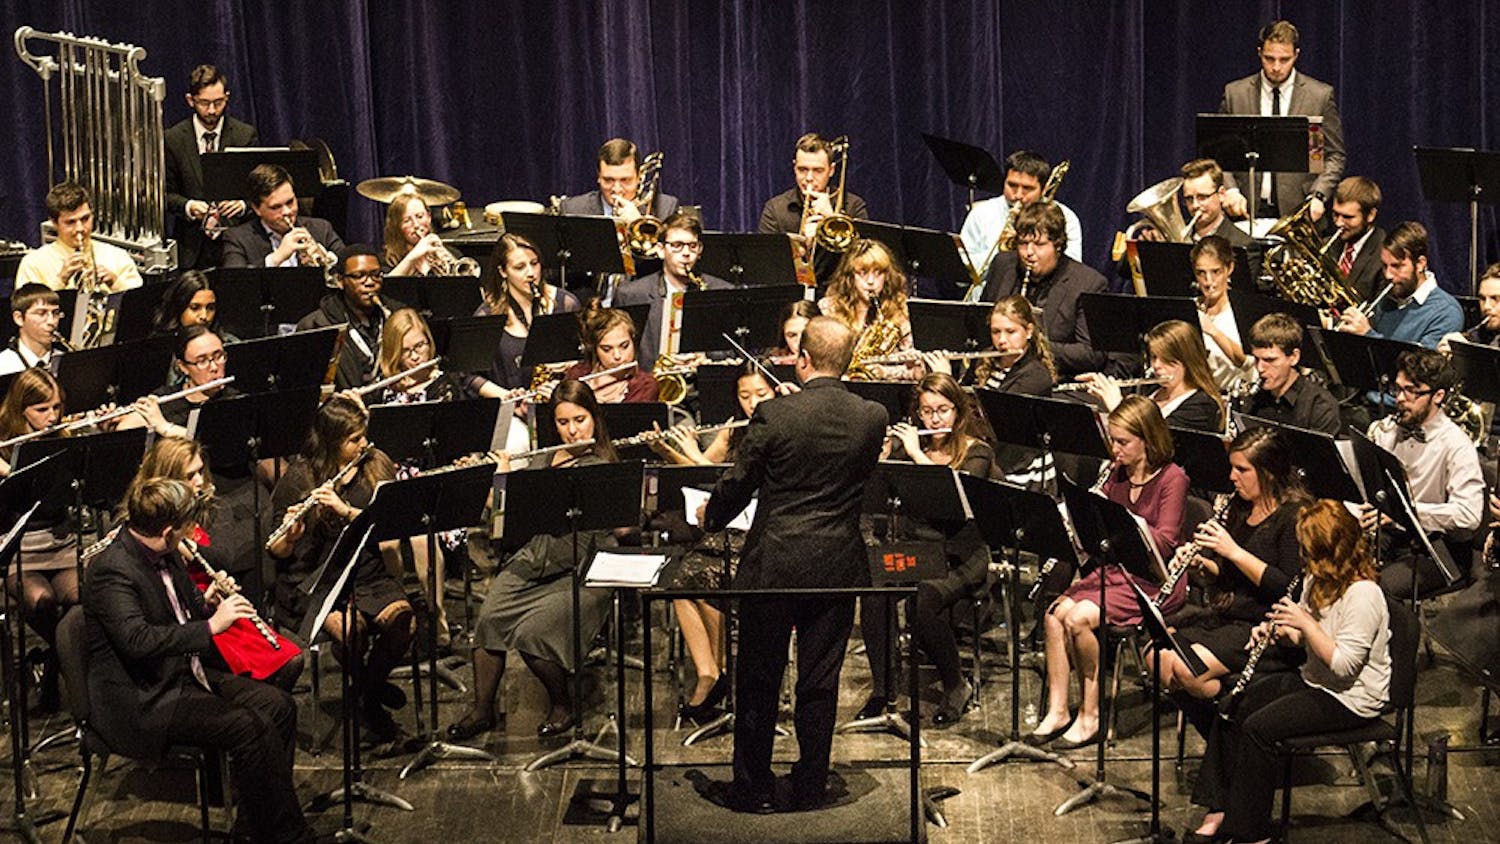 All-campus band performs at Musical Arts Center on Tuesday evening.